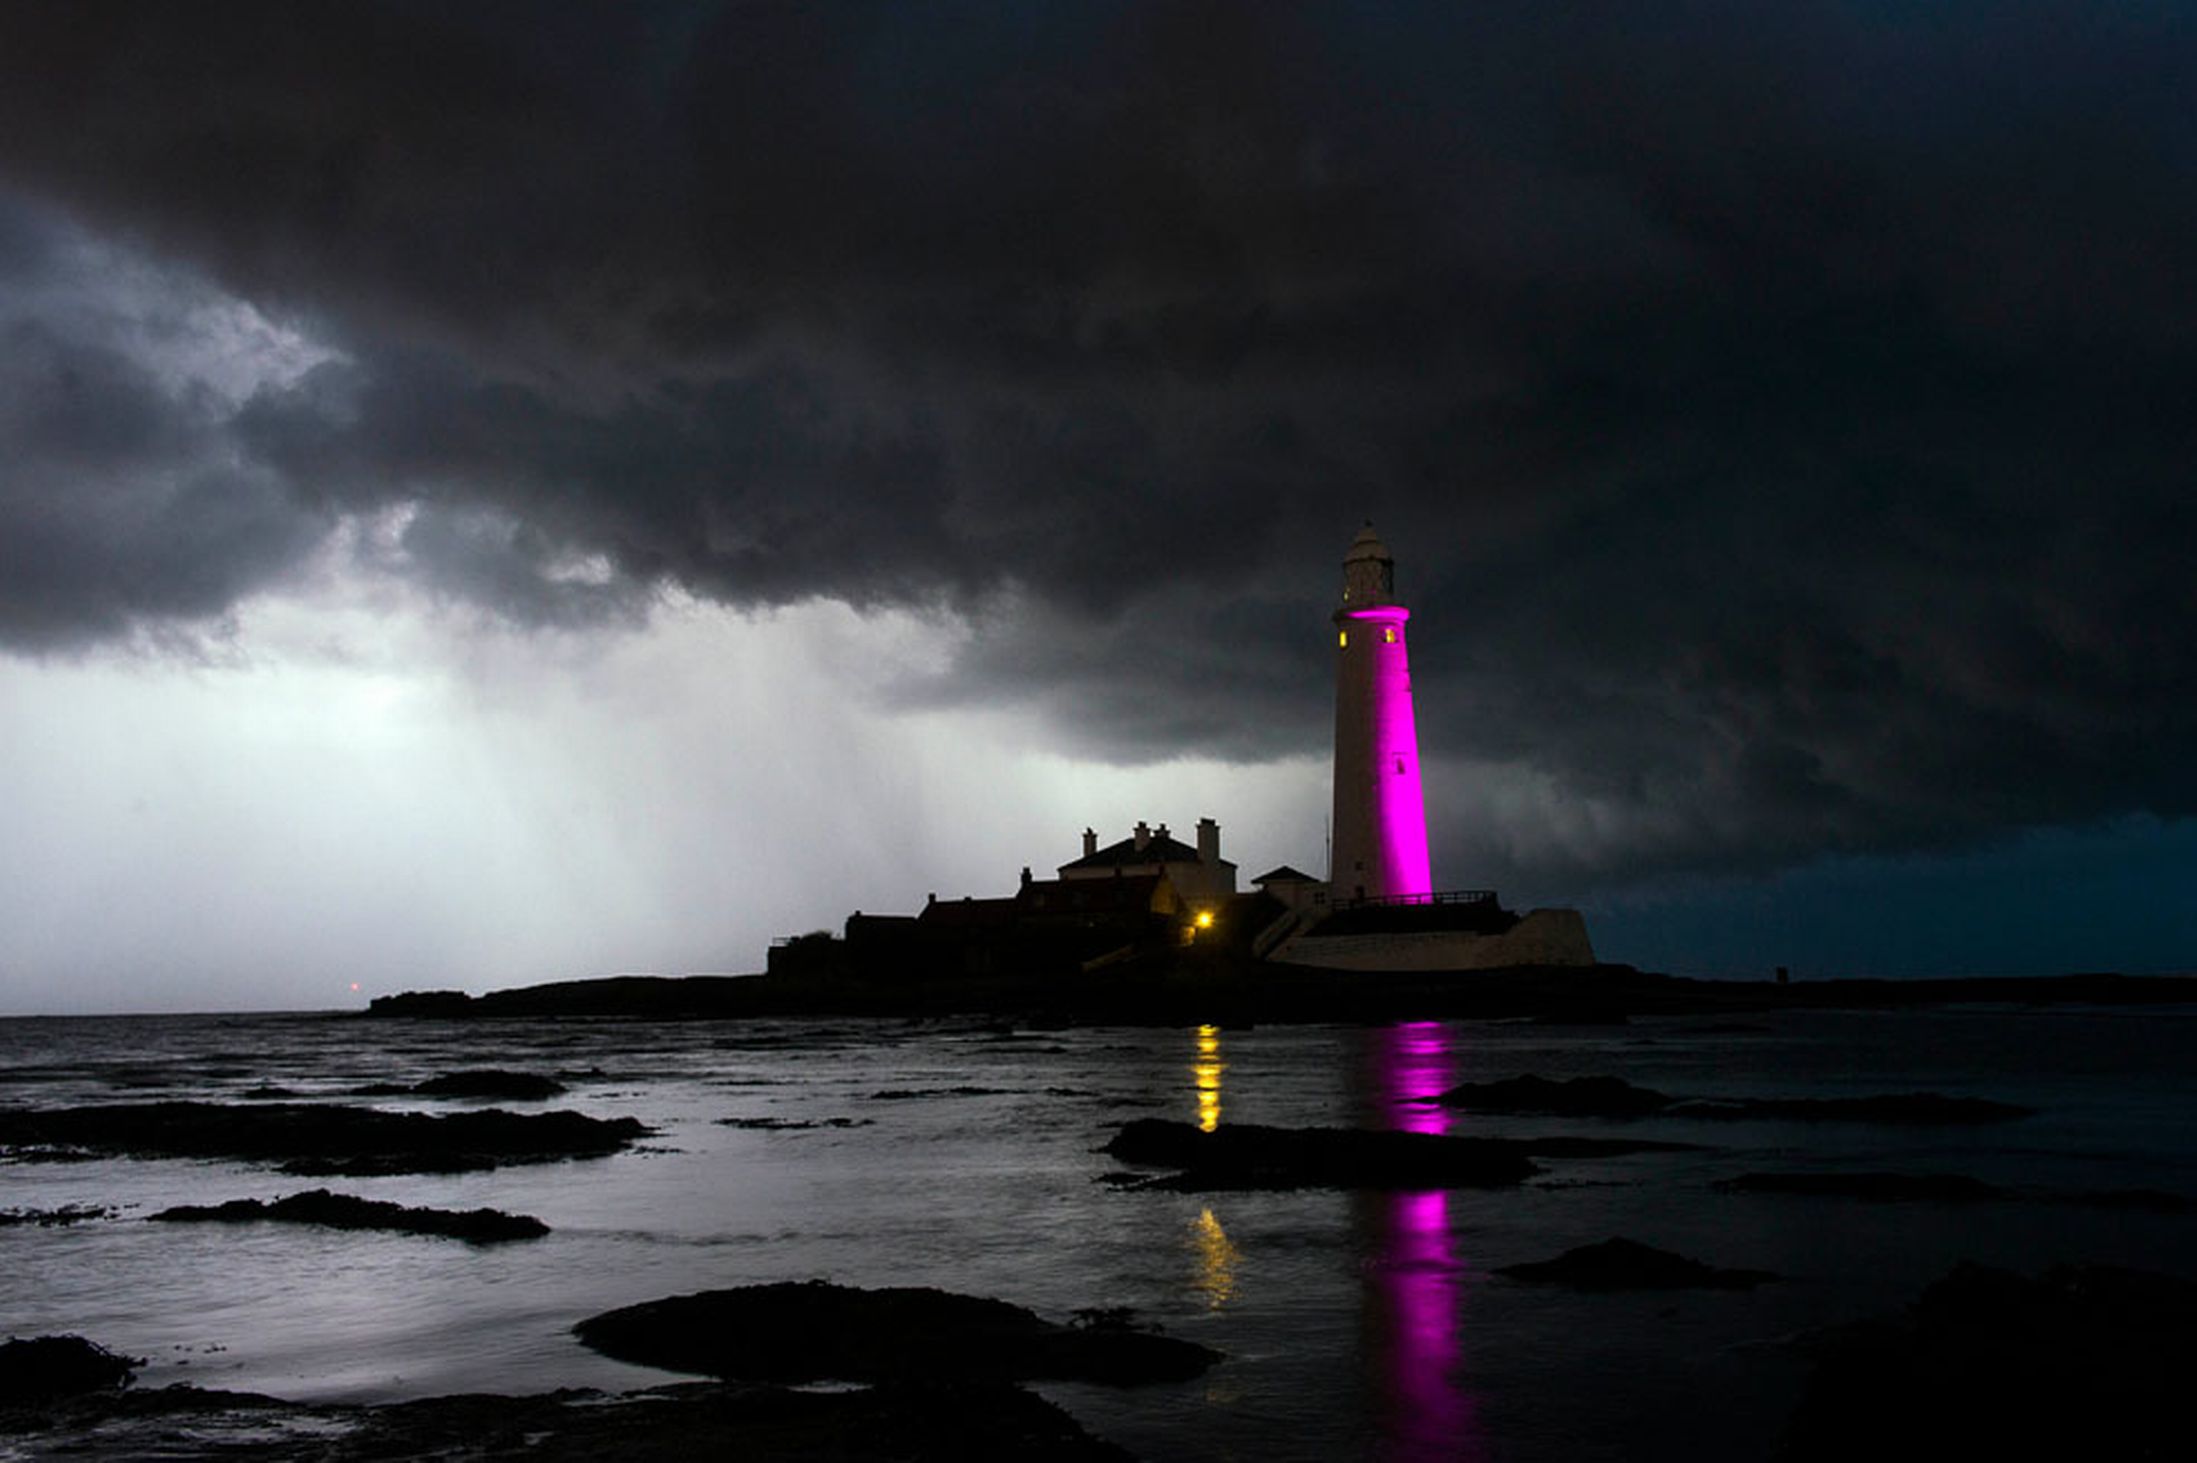 Dark-clouds-are-seen-behind-St-Marys-Lighthouse-Whitley-Bay-North-Tyneside-25th-October-2641149